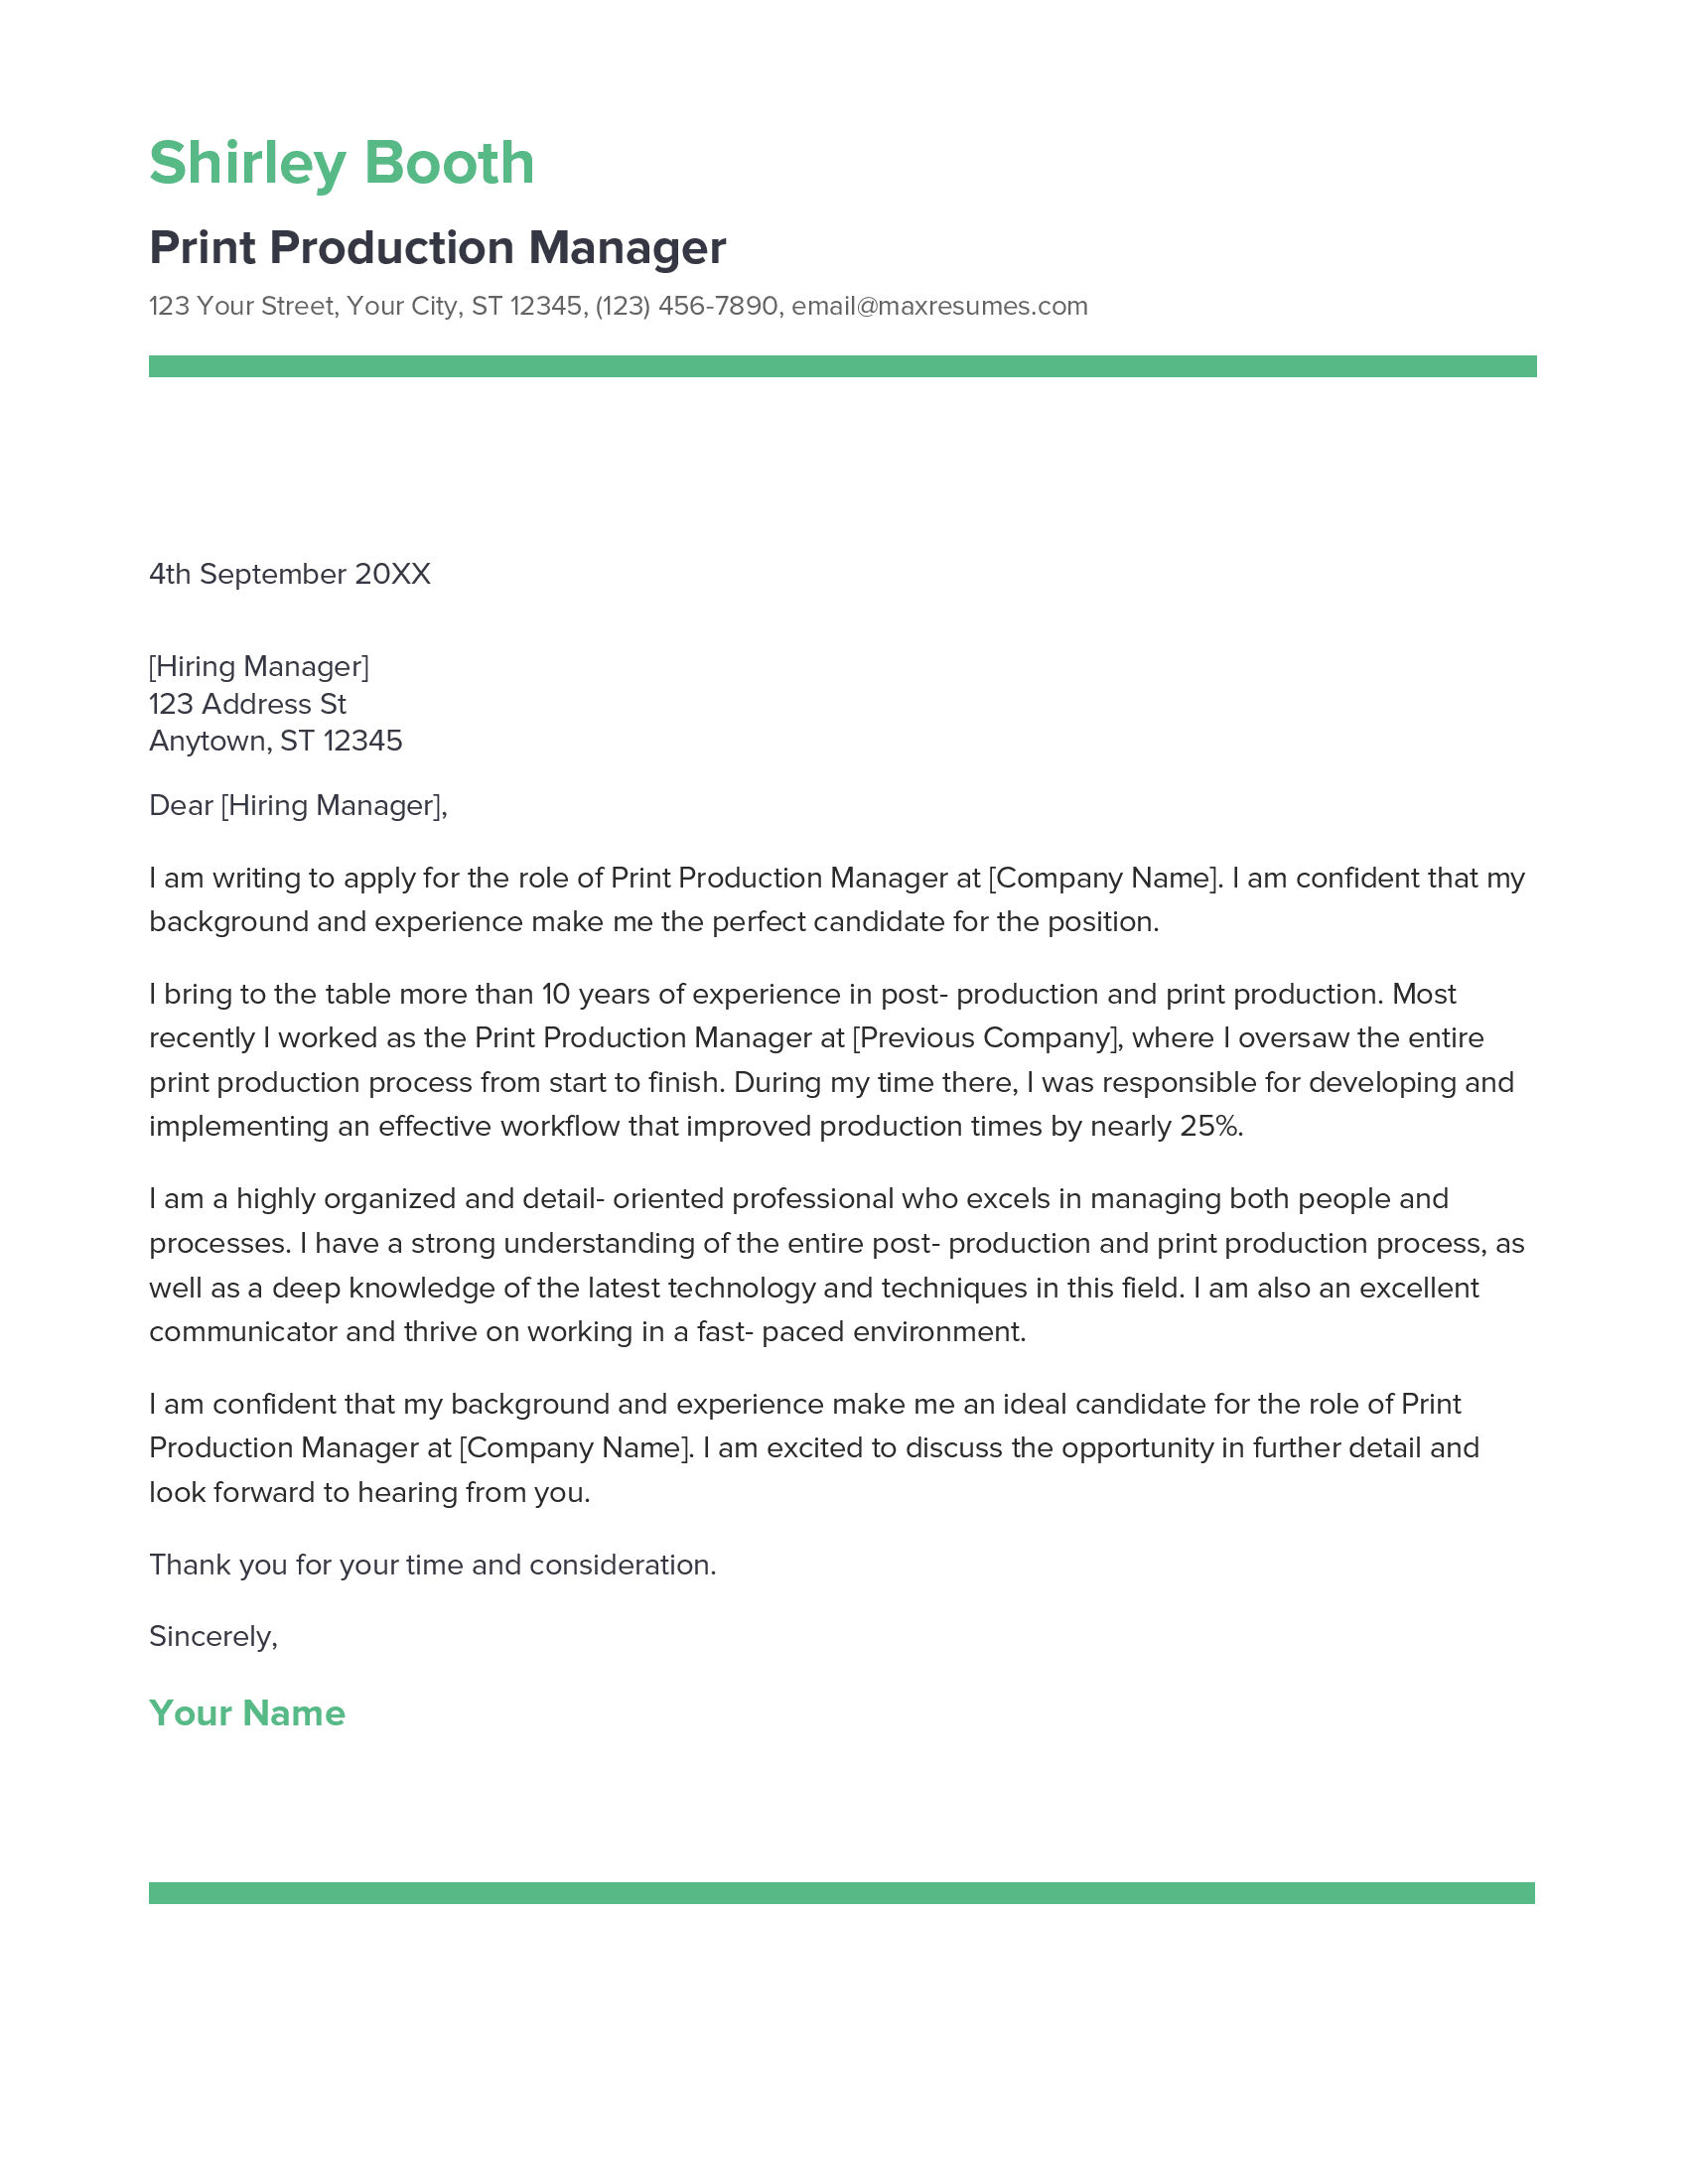 Print Production Manager Cover Letter Example